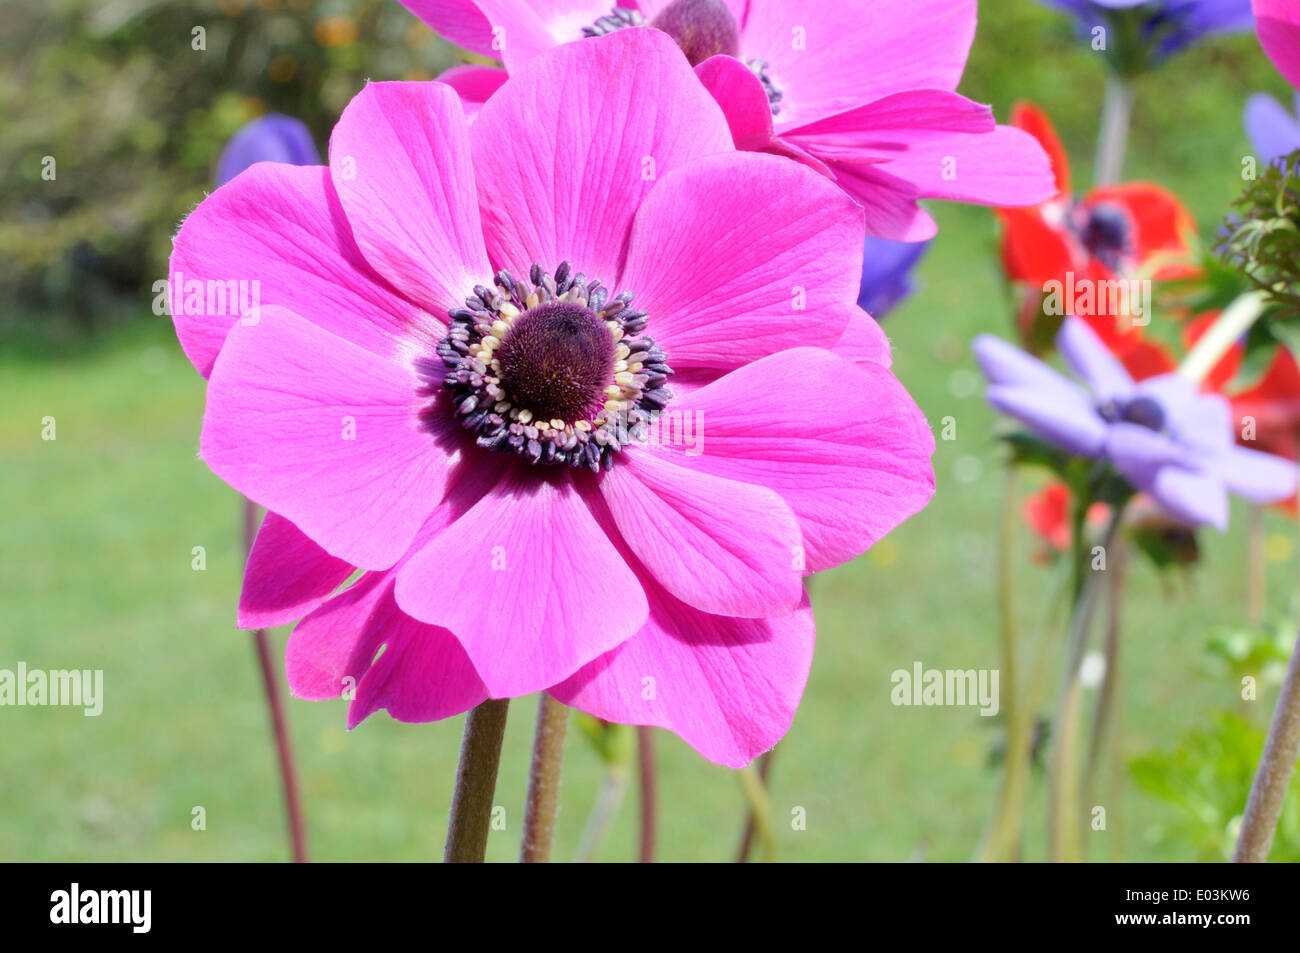 Close up of bright pink Anemone flower Stock Photo